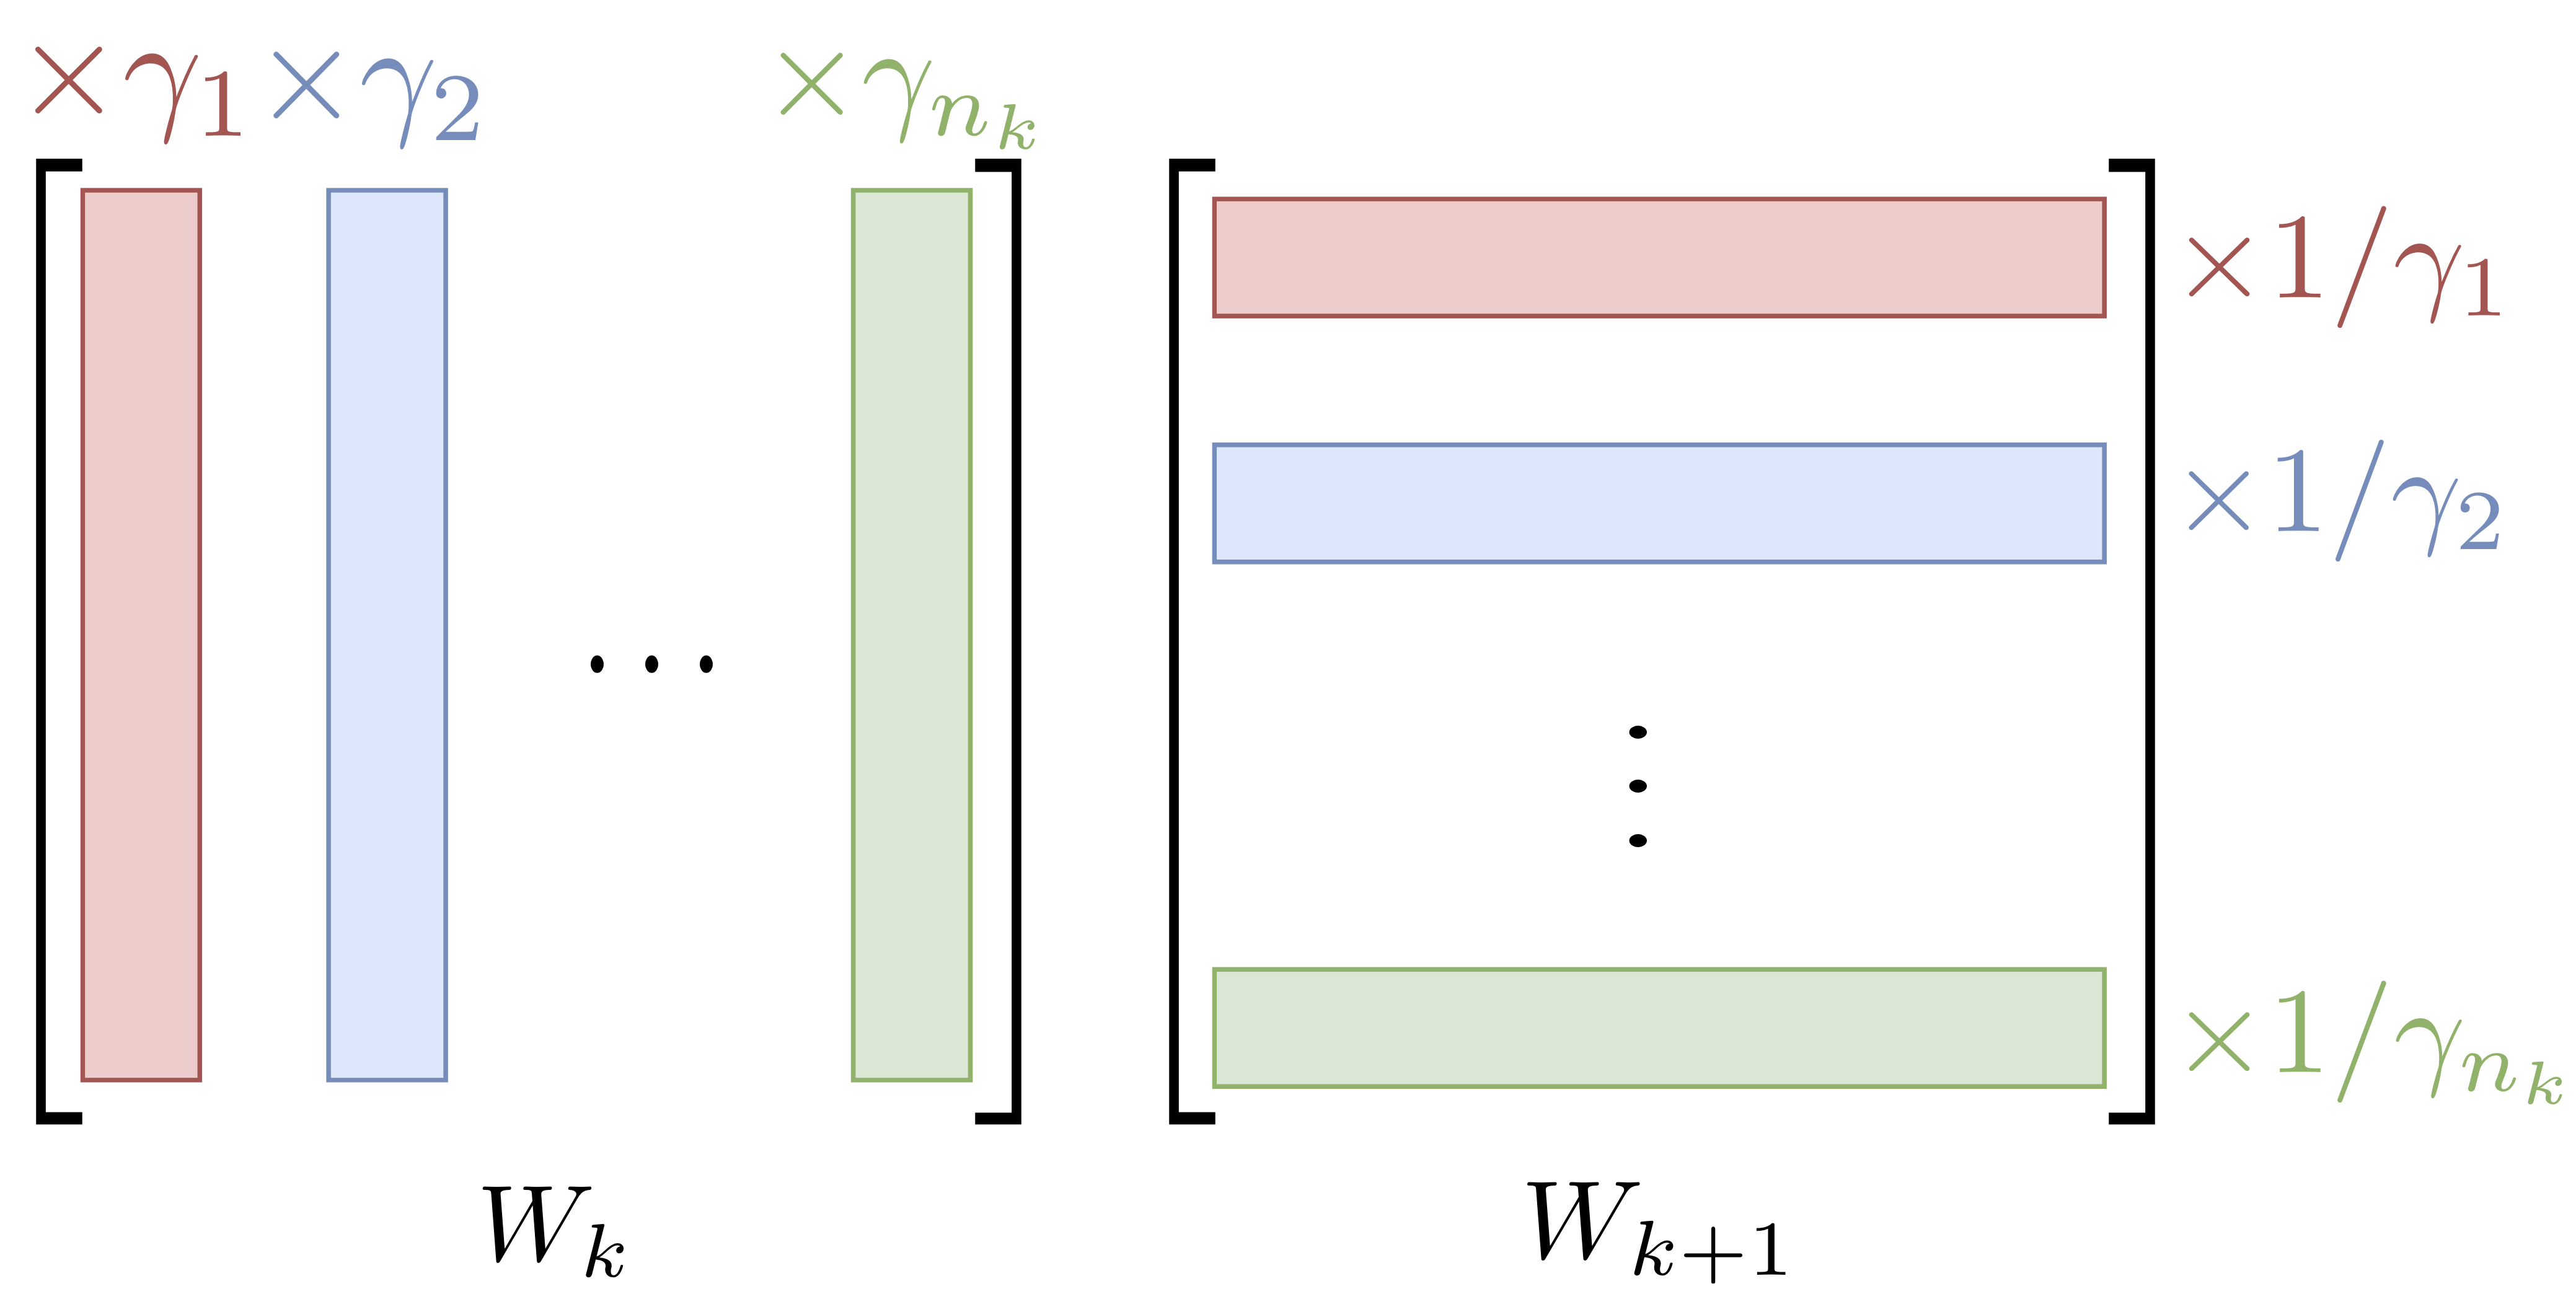 Matrices $W_k$ and $W_{k+1}$ are updated by multiplying the columns of the first matrix with rescaling coefficients. The rows of the second matrix are inversely rescaled to ensure that the product of the two matrices is unchanged. The rescaling coefficients are strictly positive to ensure functional equivalence when the matrices are interleaved with \mbox{ReLUs}. This rescaling is applied iteratively to each pair of adjacent matrices